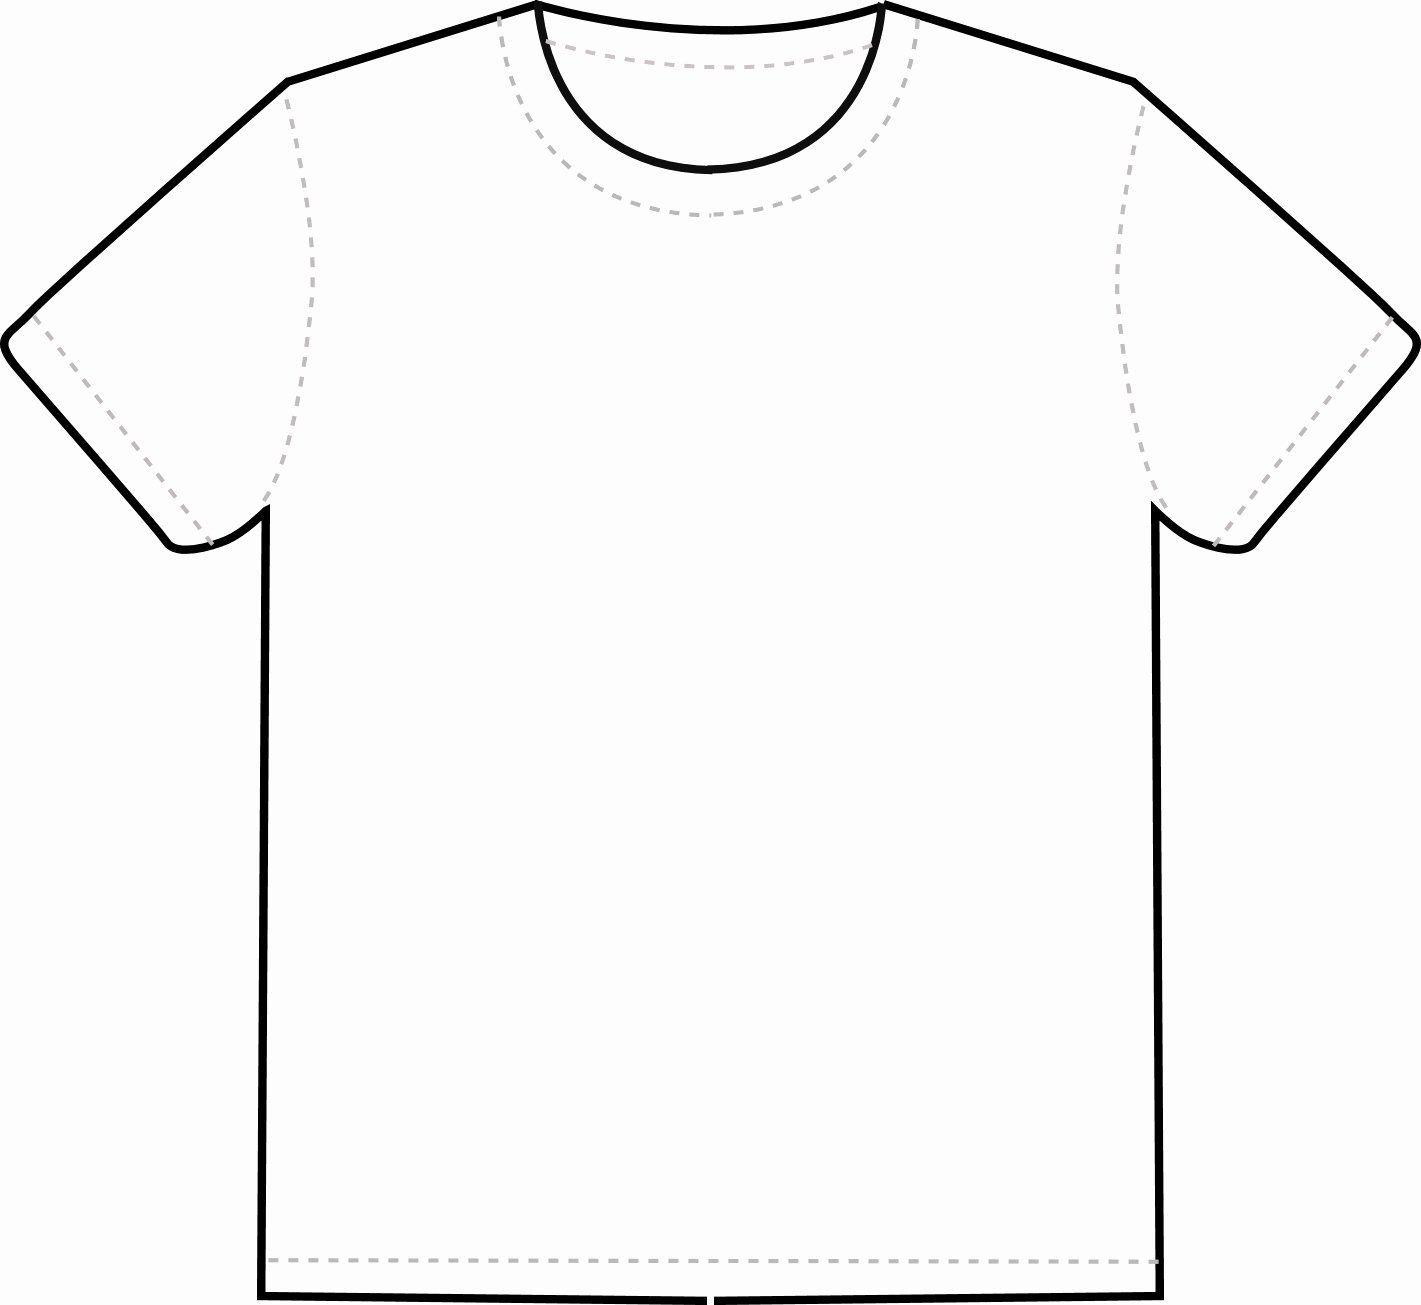 T Shirt Coloring Page Awesome Free T Shirt Template with Blank Tshirt ...